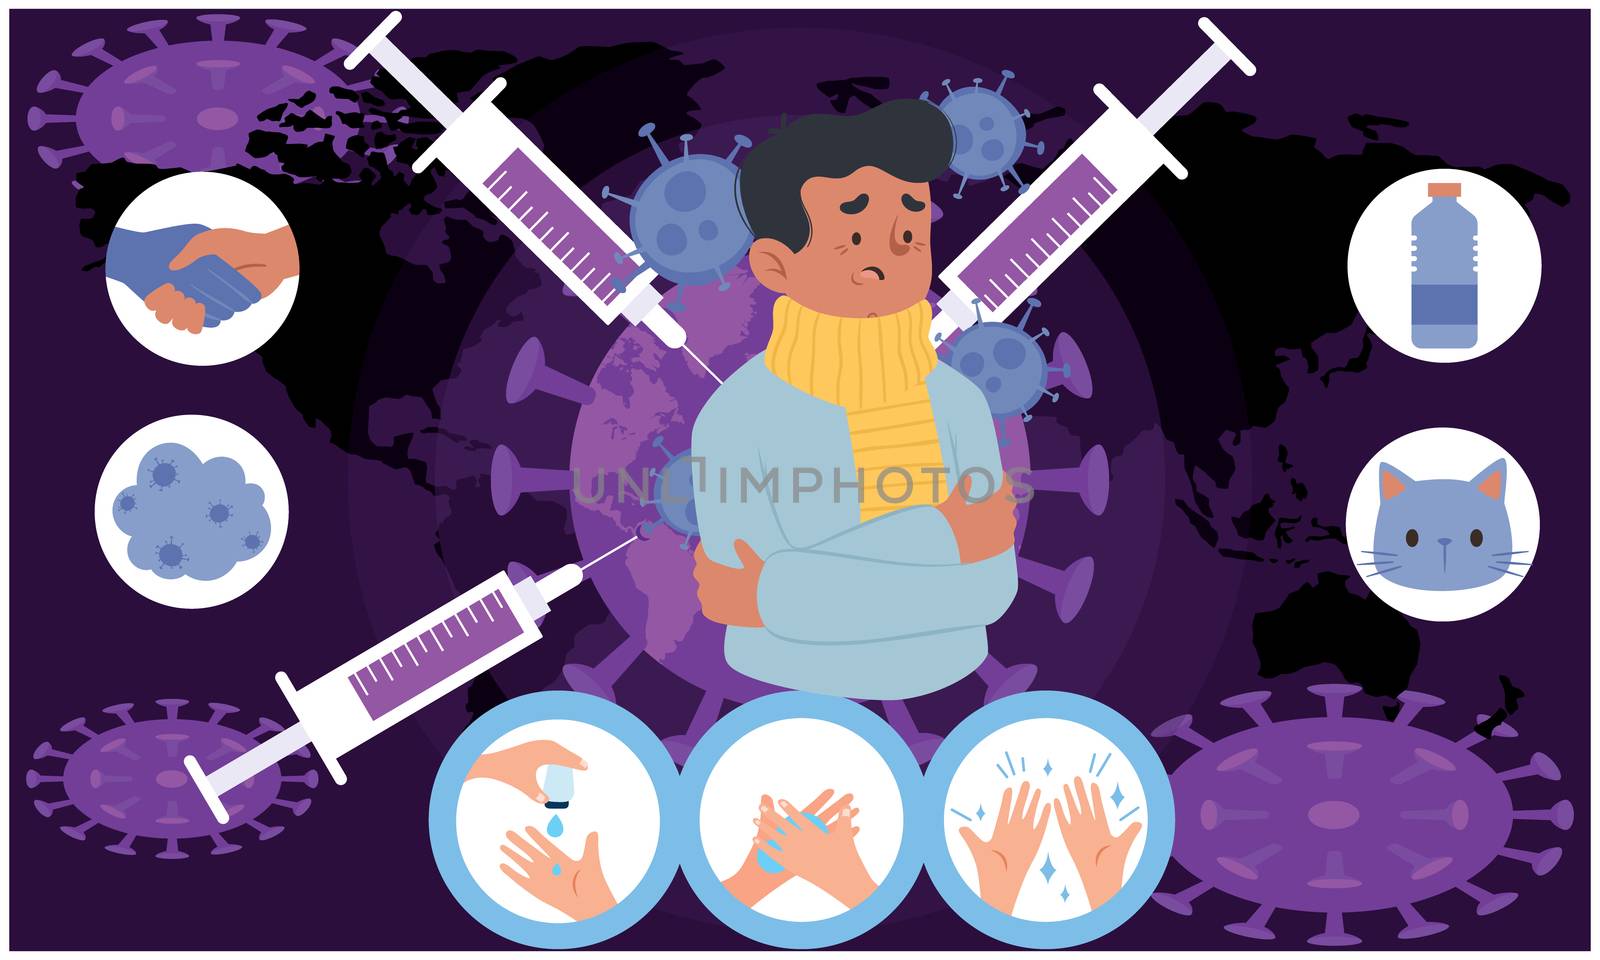 vaccination for virus infection around the world by aanavcreationsplus